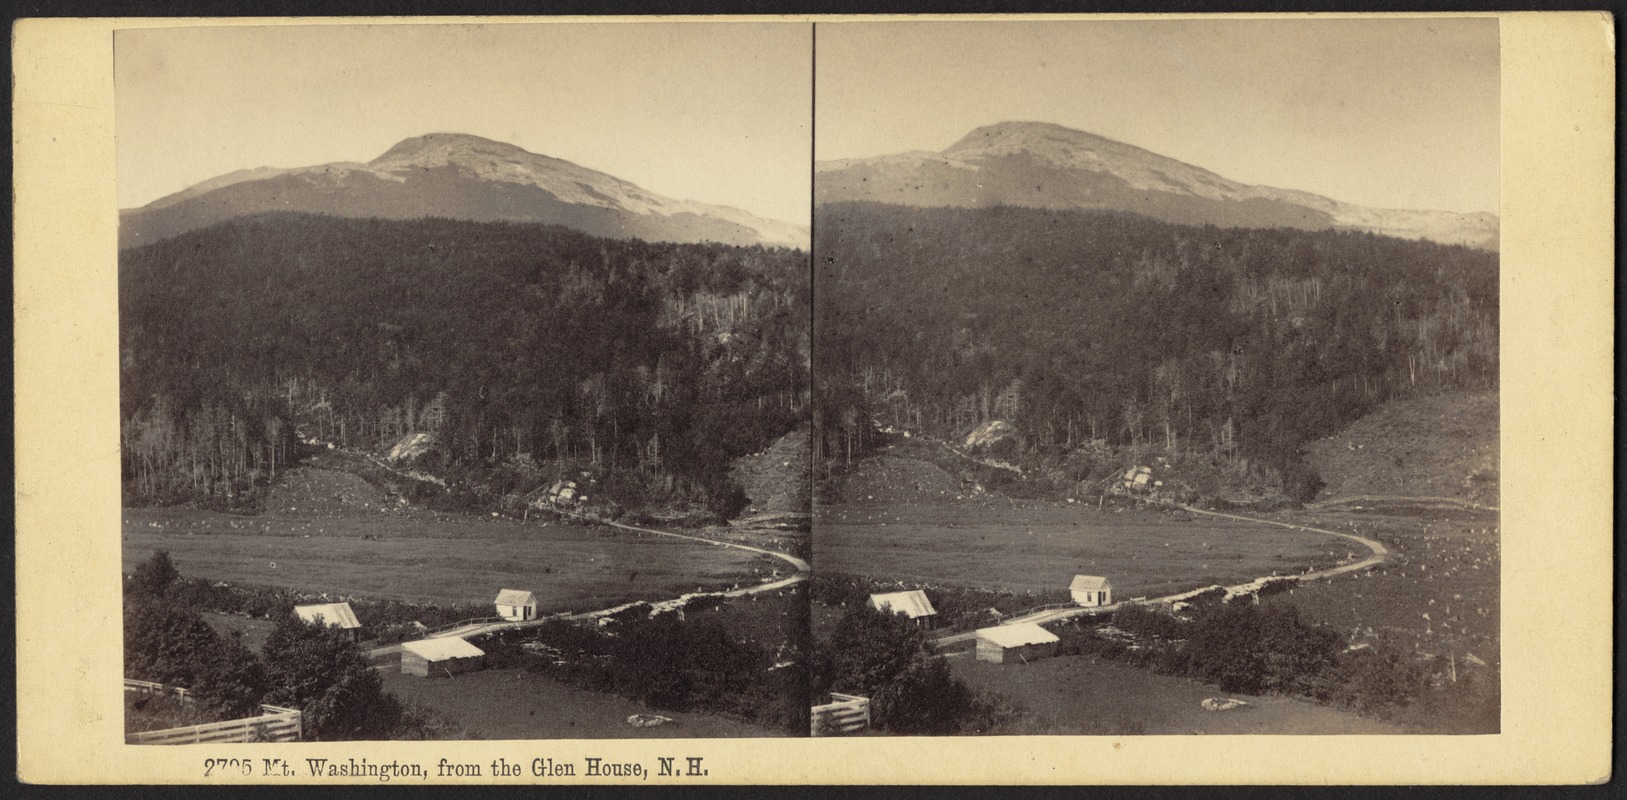 Mt. Washington, from the Glen House, N. H.